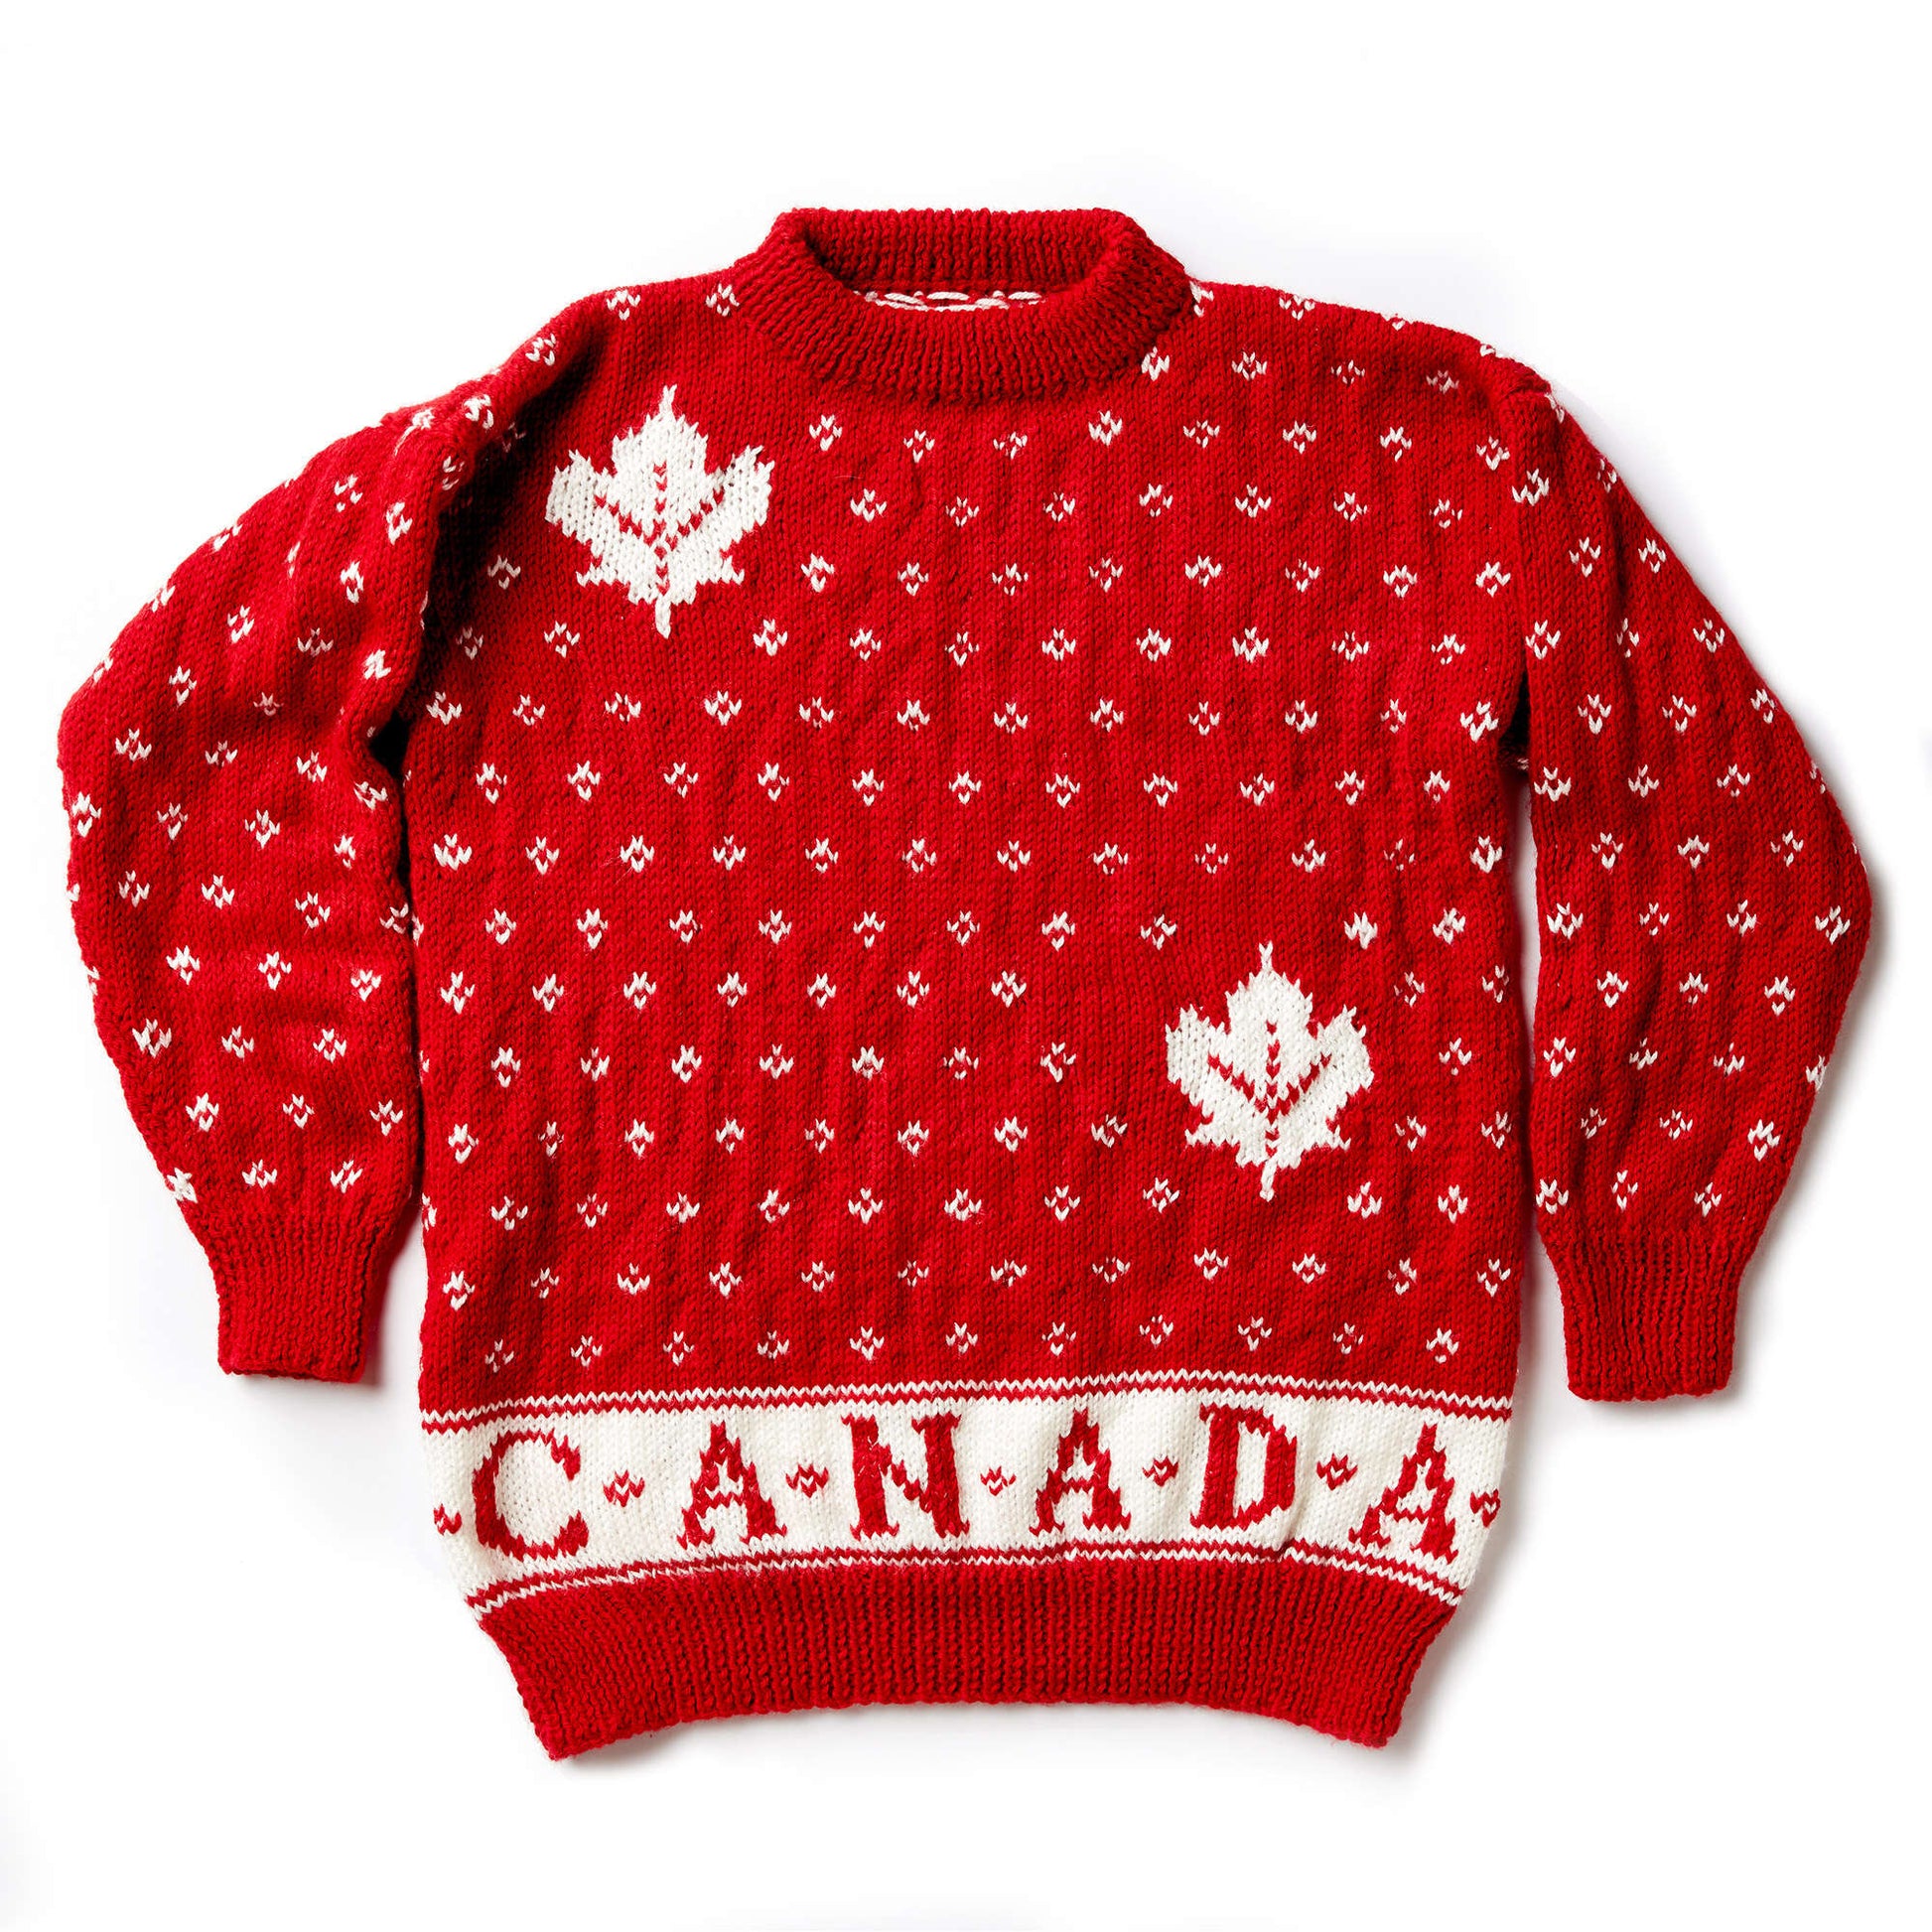 Patons Canada Knit Adult Sweater XS/S